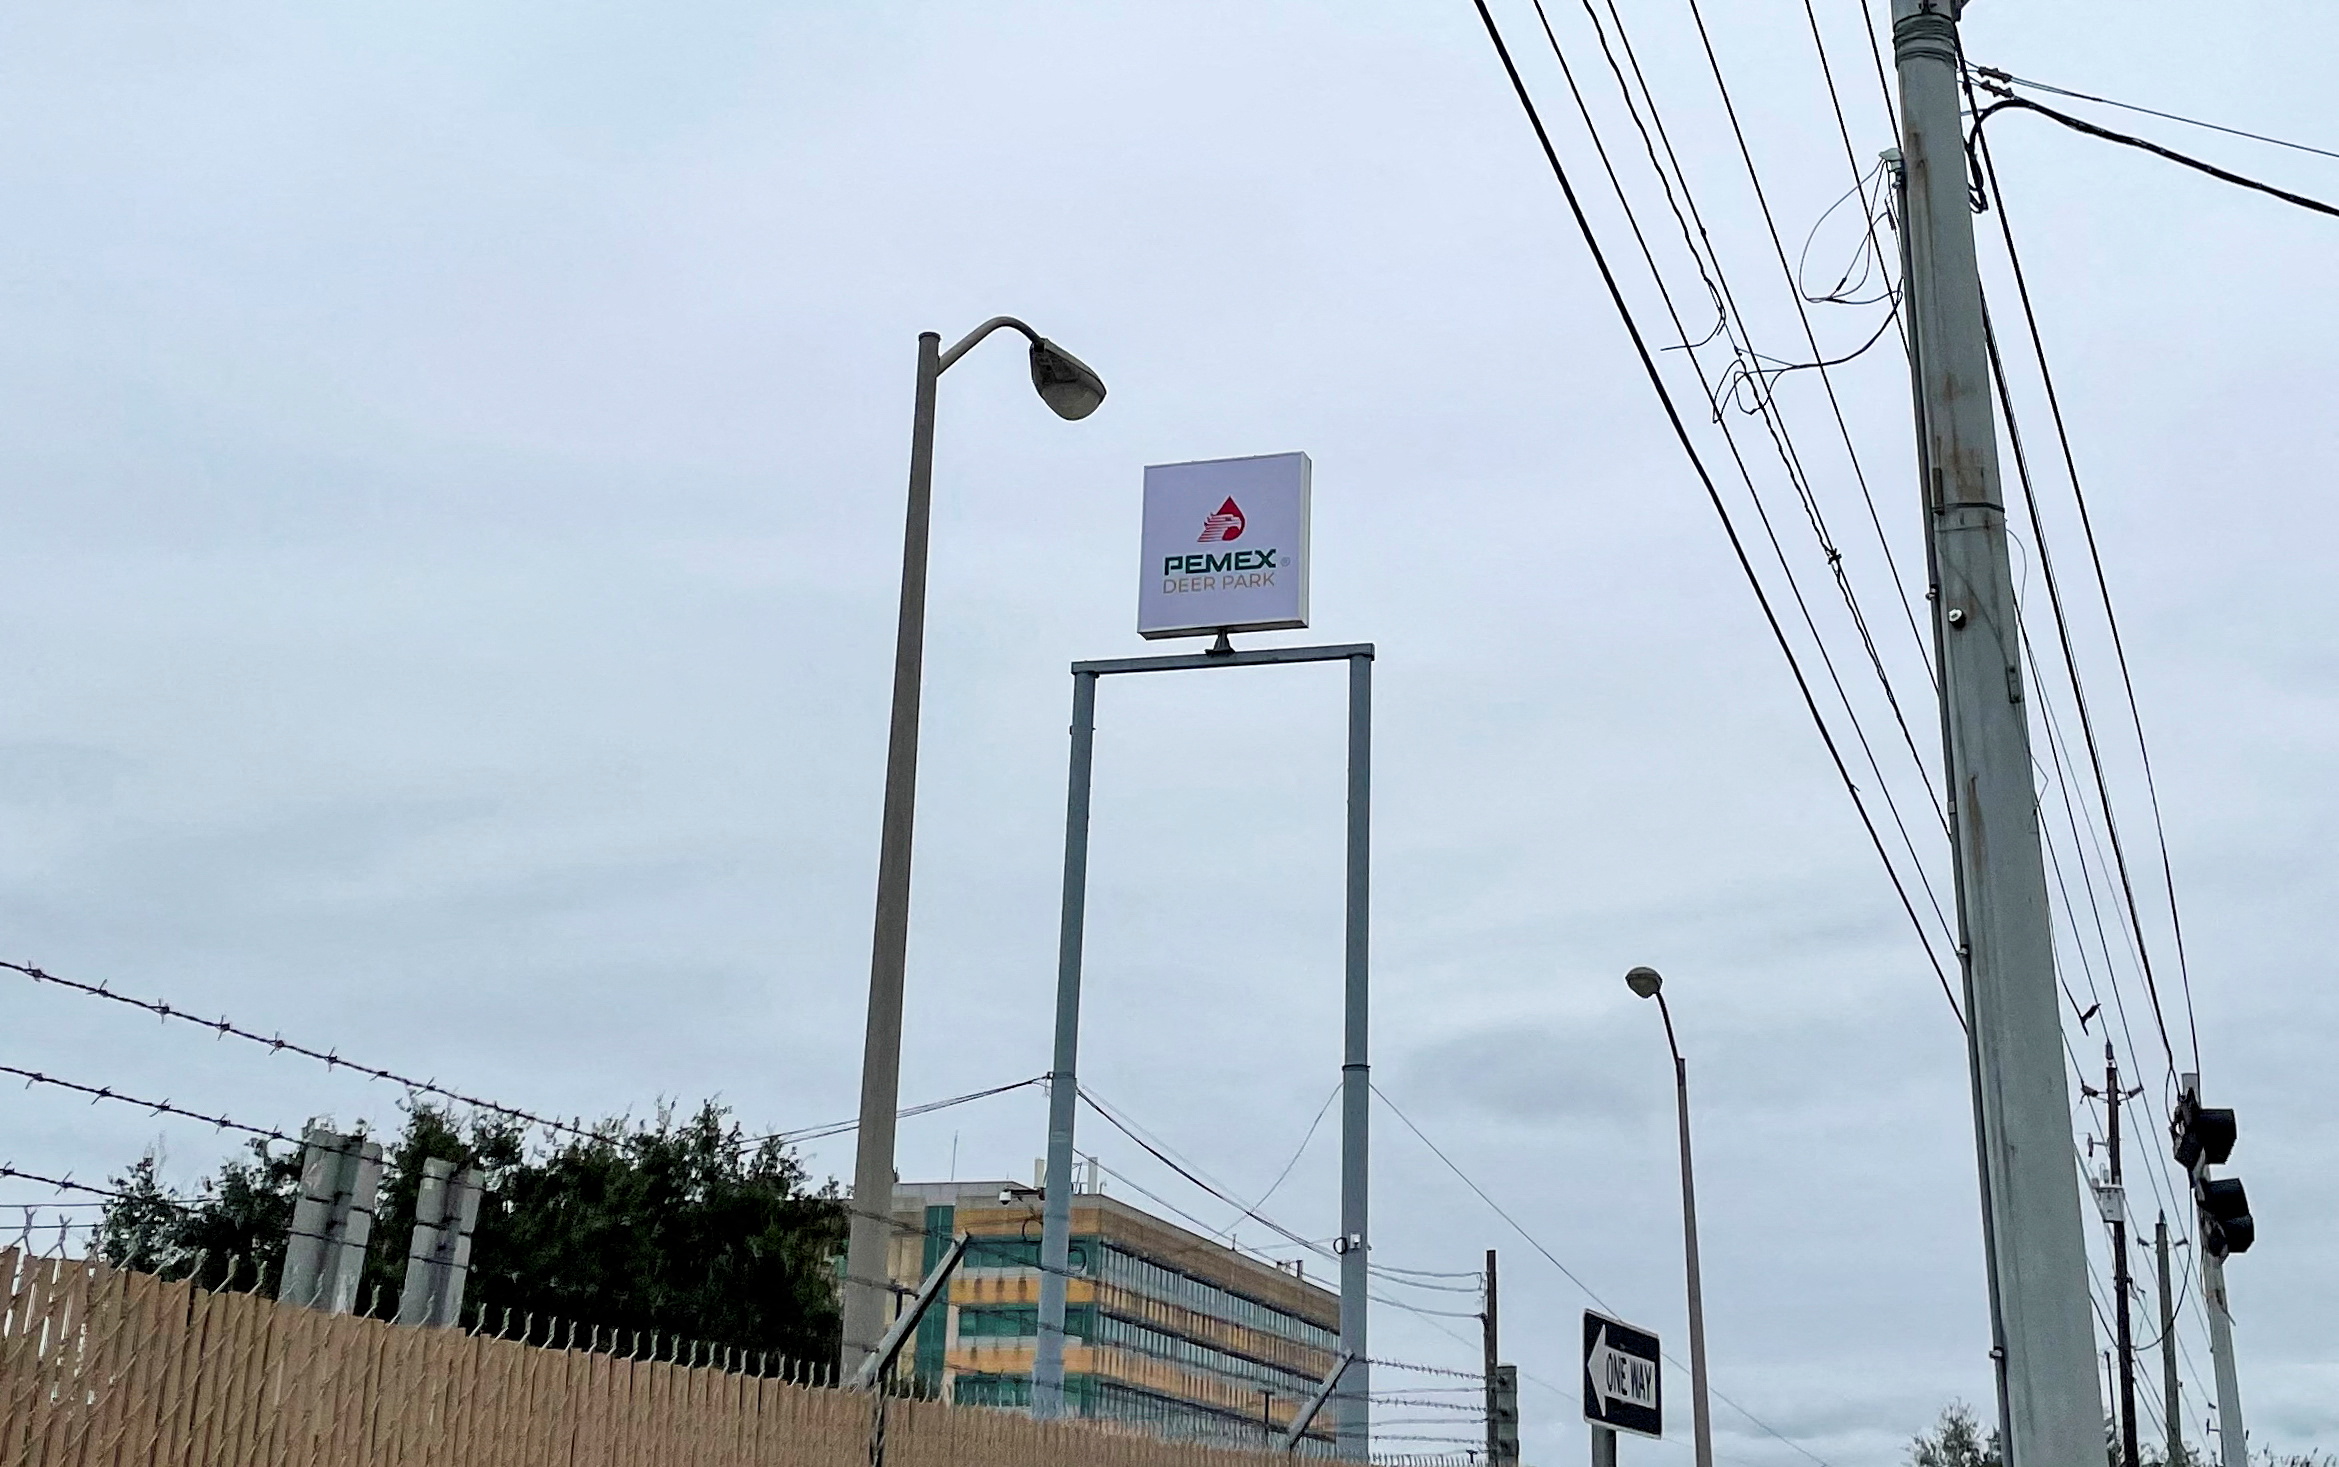 A new sign over a crude oil refinery, which shows the sole ownership of the plant by Mexico's national oil company Pemex, is pictured in Deer Park